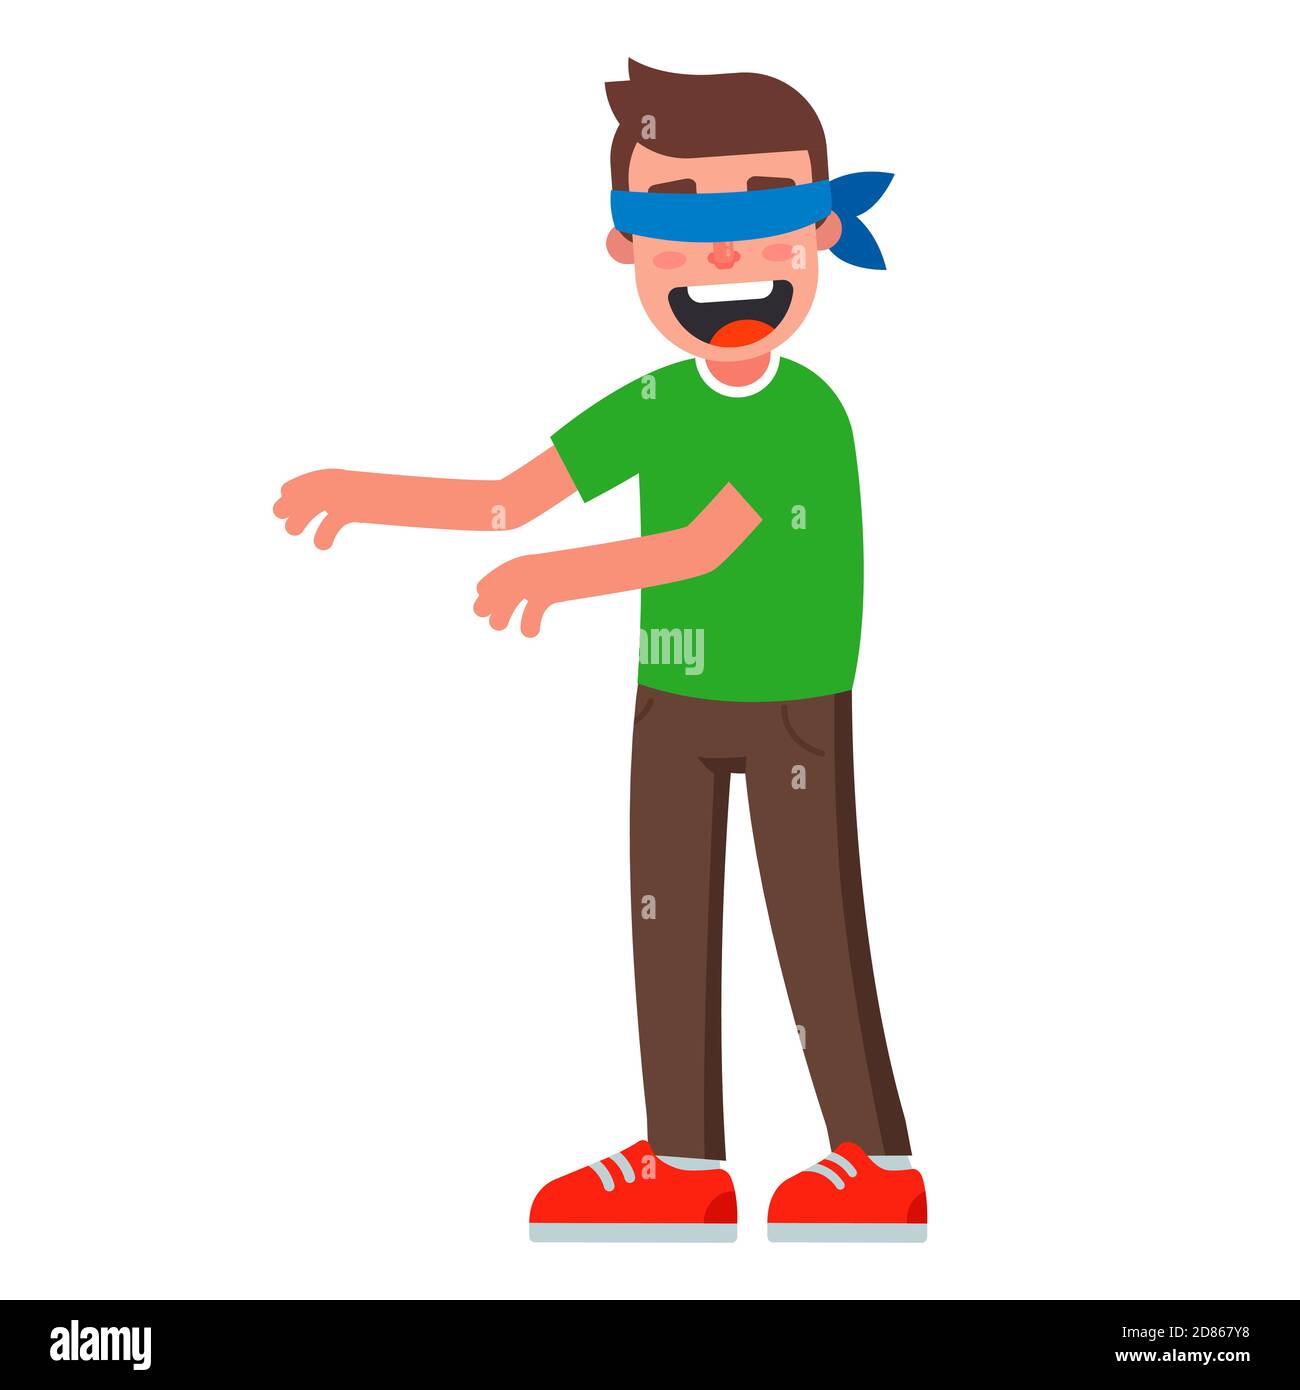 Blindfolded man (Traced) by Mourage on DeviantArt